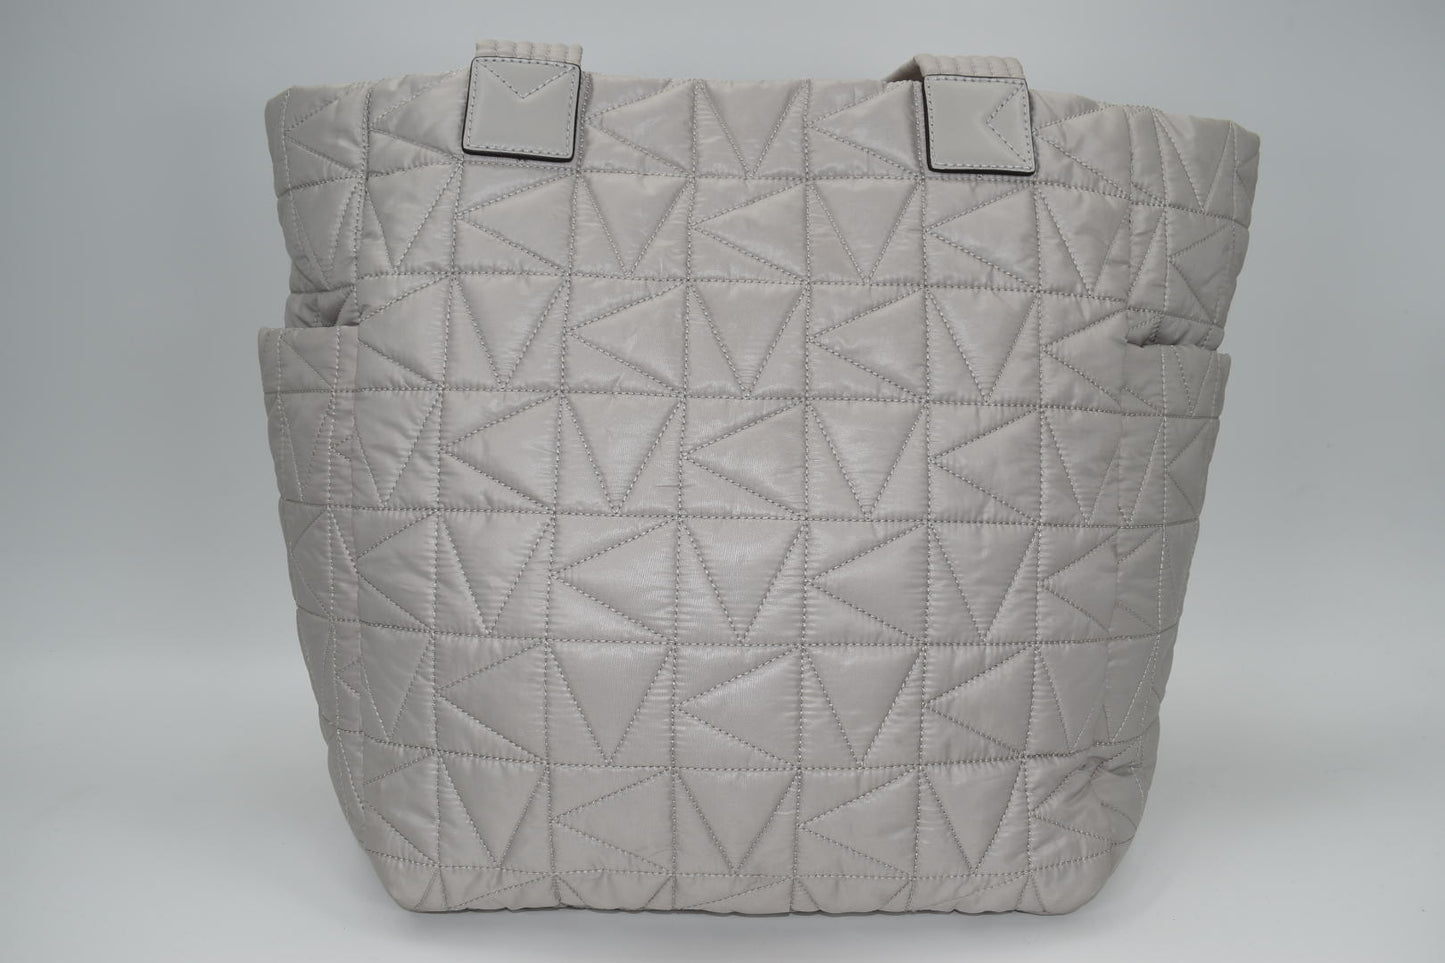 Michael Kors Winnie Large Quilted Tote Bag in Aluminum Color